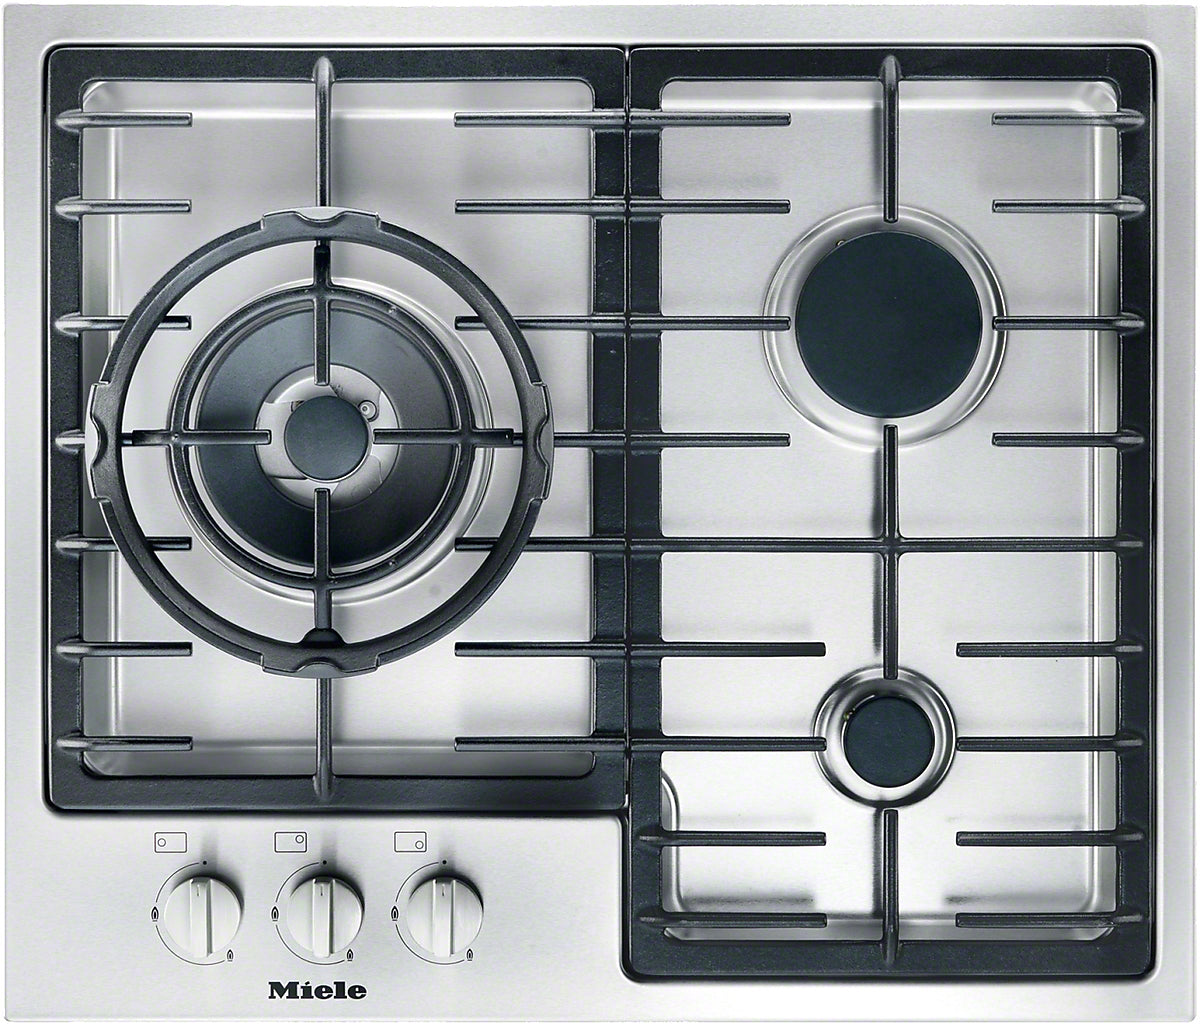 Miele KM 2312 G Stainless Steel Gas Cooktop